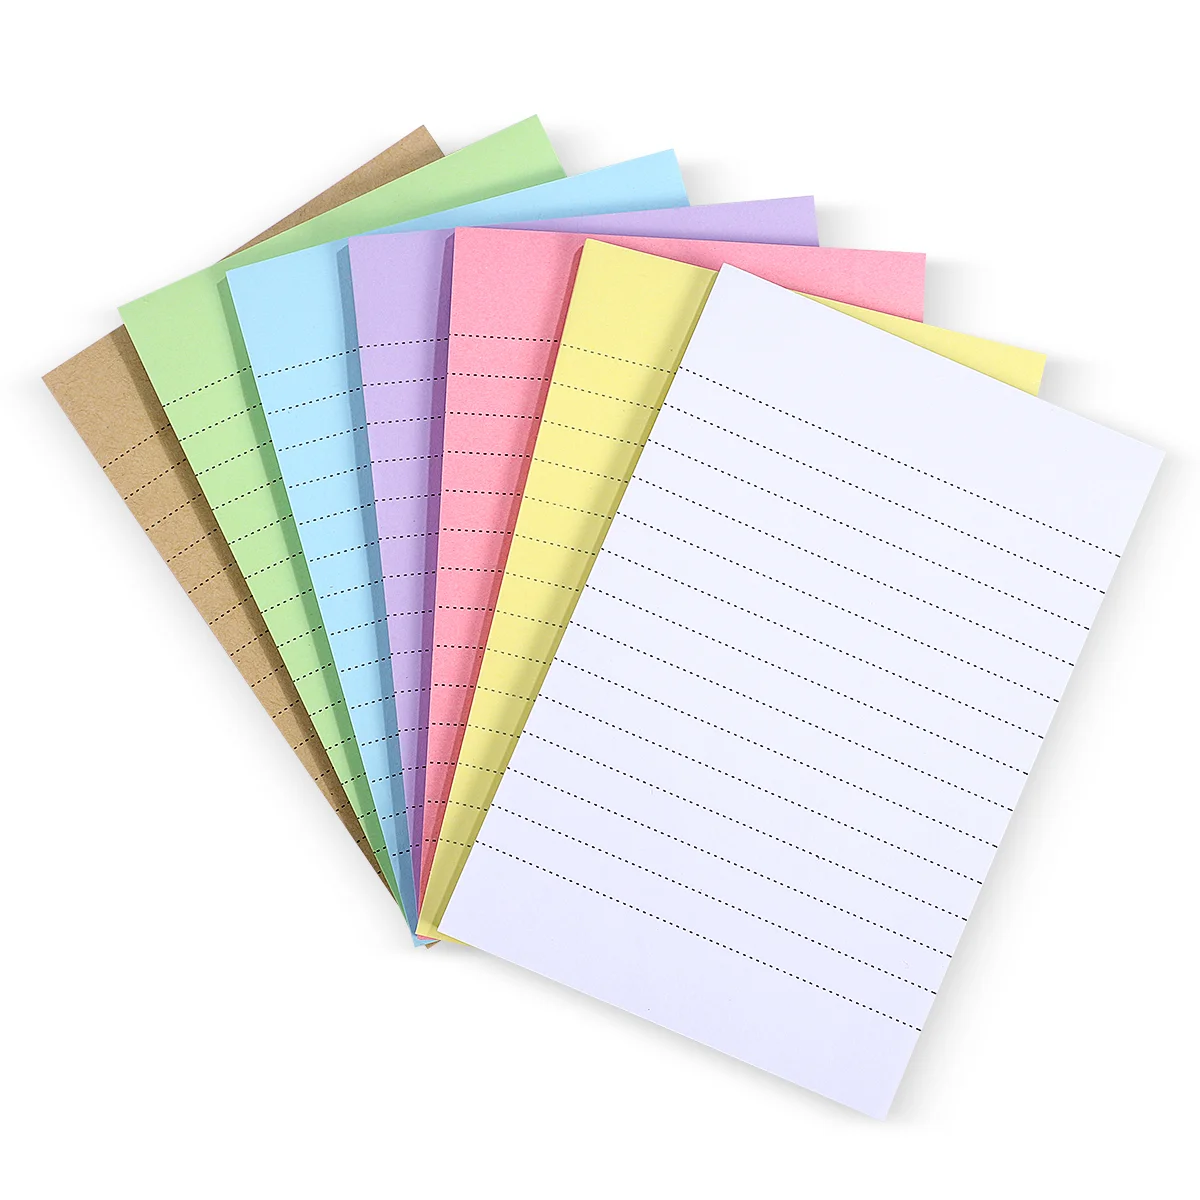 7 Pads Notepad Writing Pads Legal Pads School Supplies for College Students School Supplies Self- Stick Notes